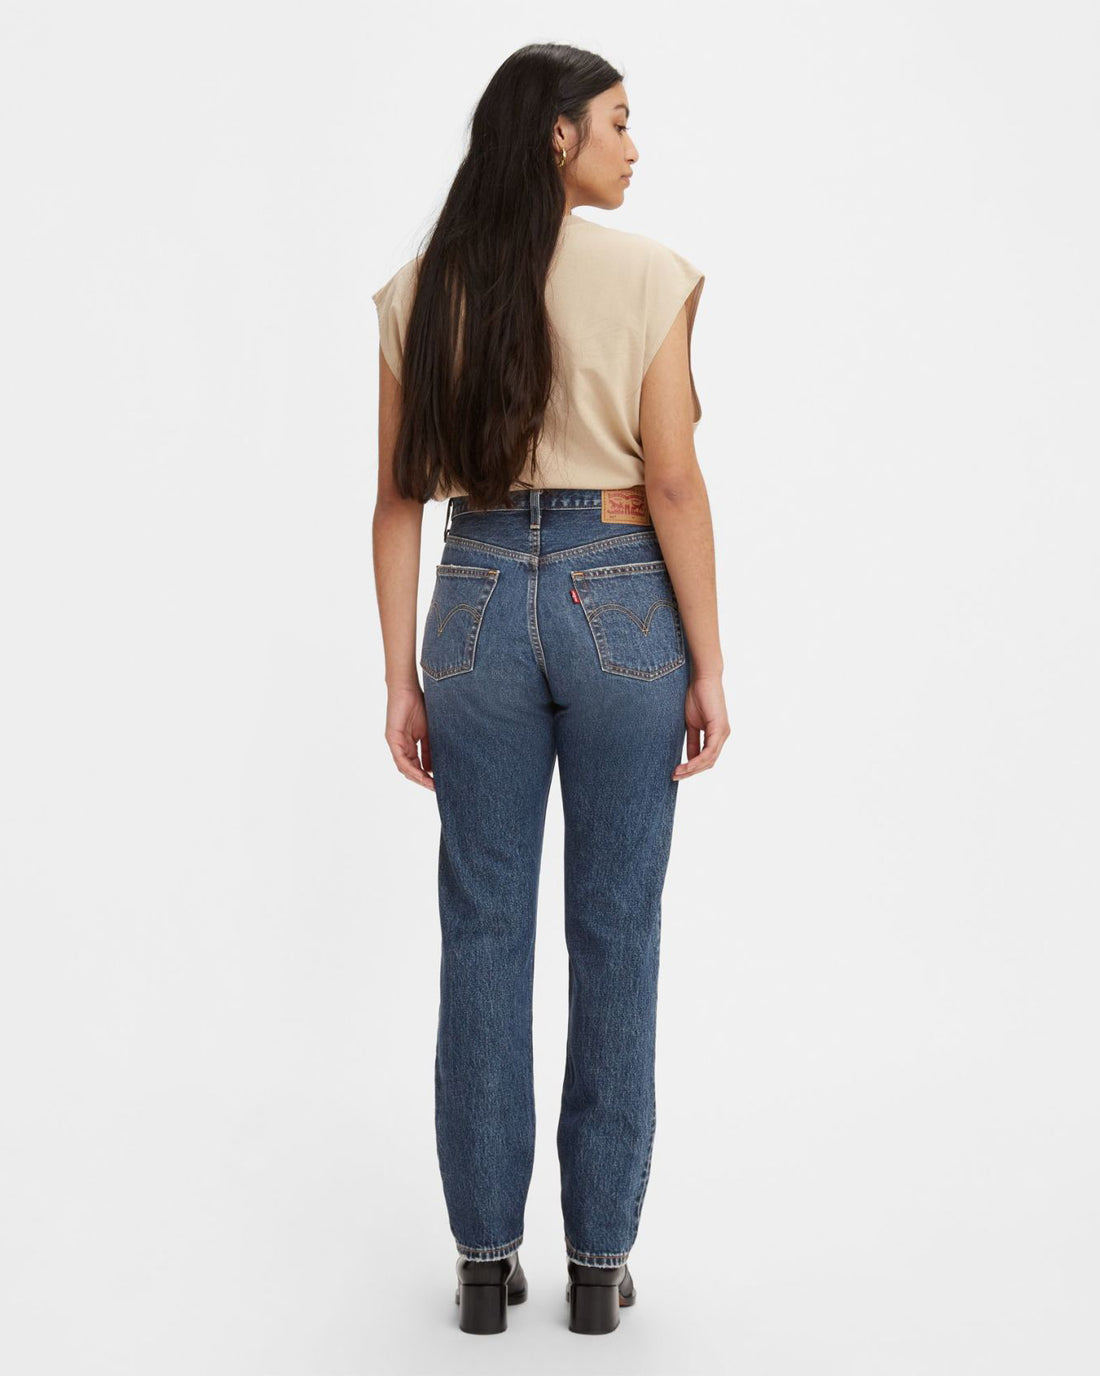 Levi's® 501 Jeans For Women - Gold Digging Selvedge – JEANSTORE